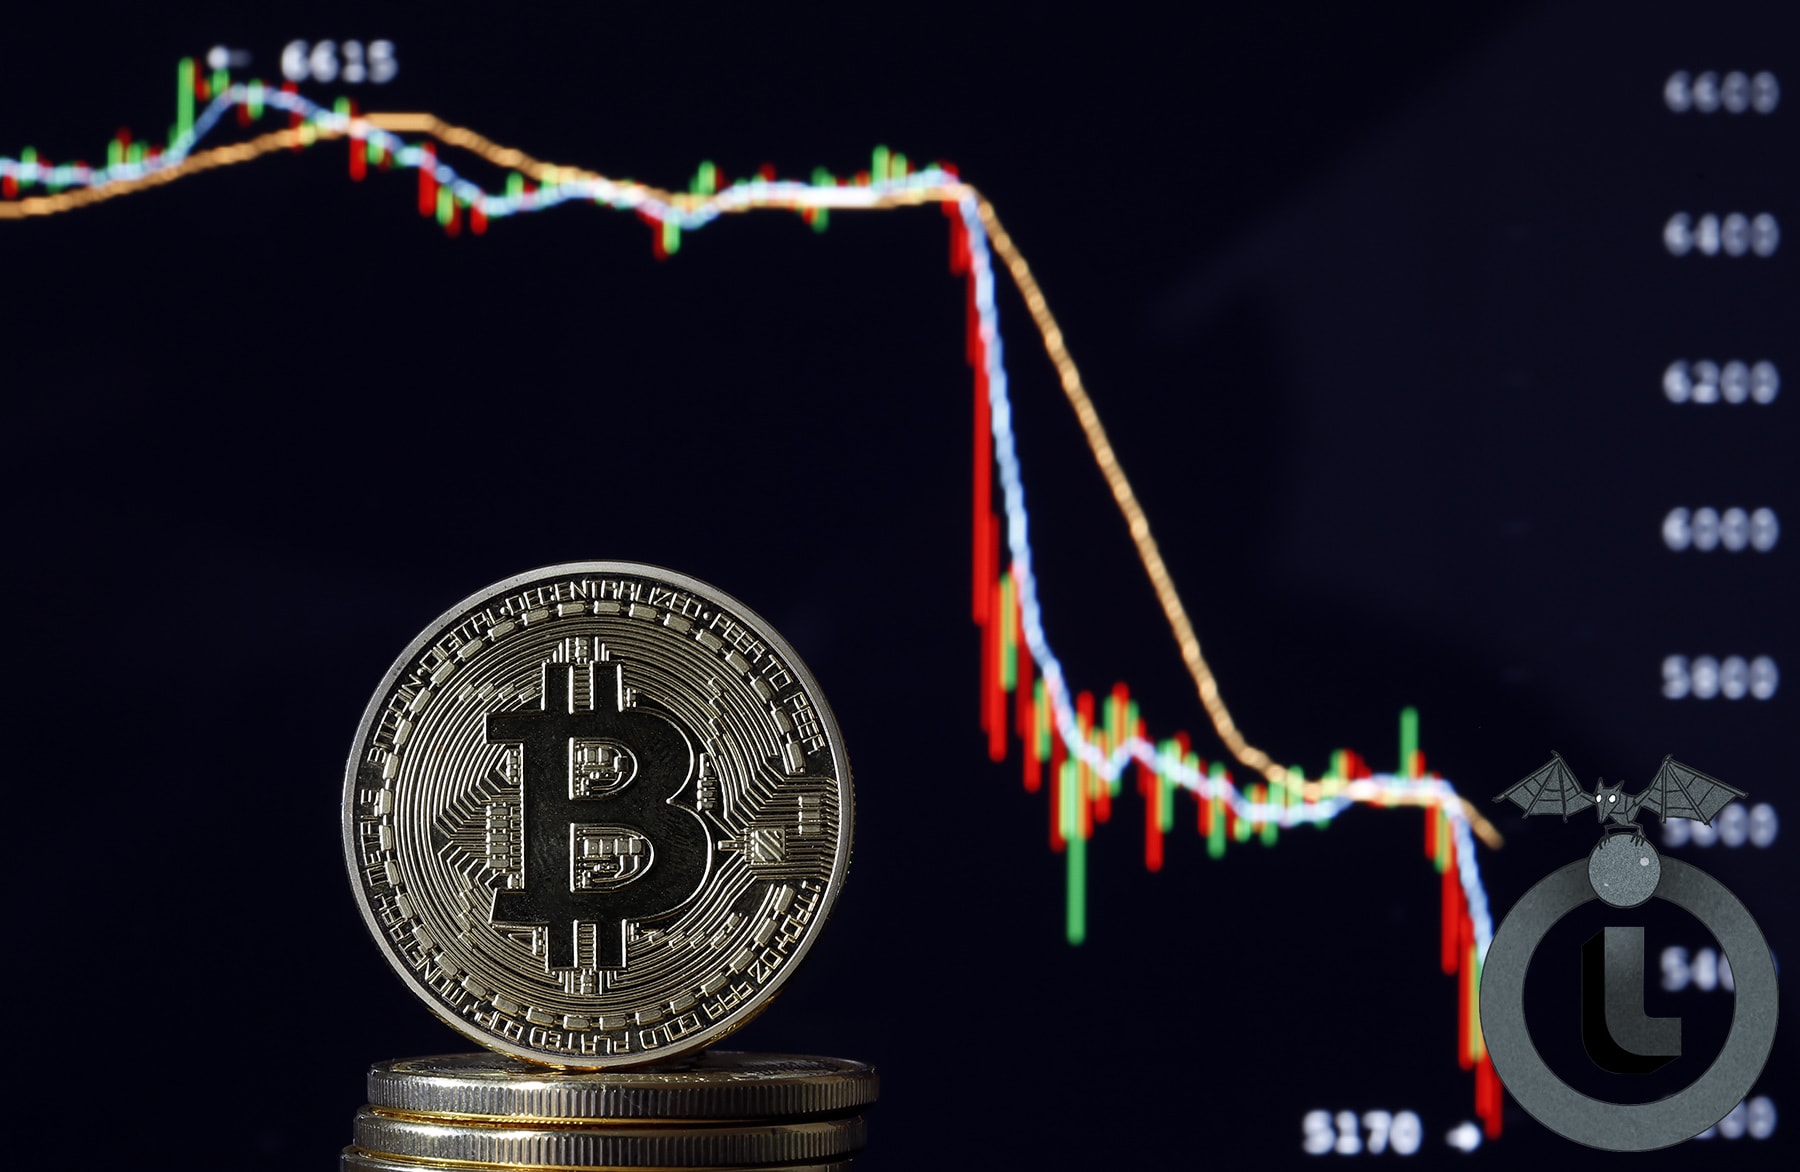 Bitcoin S Terrible 2018 Doesn T Bode Well For The Future Of Crypto - 